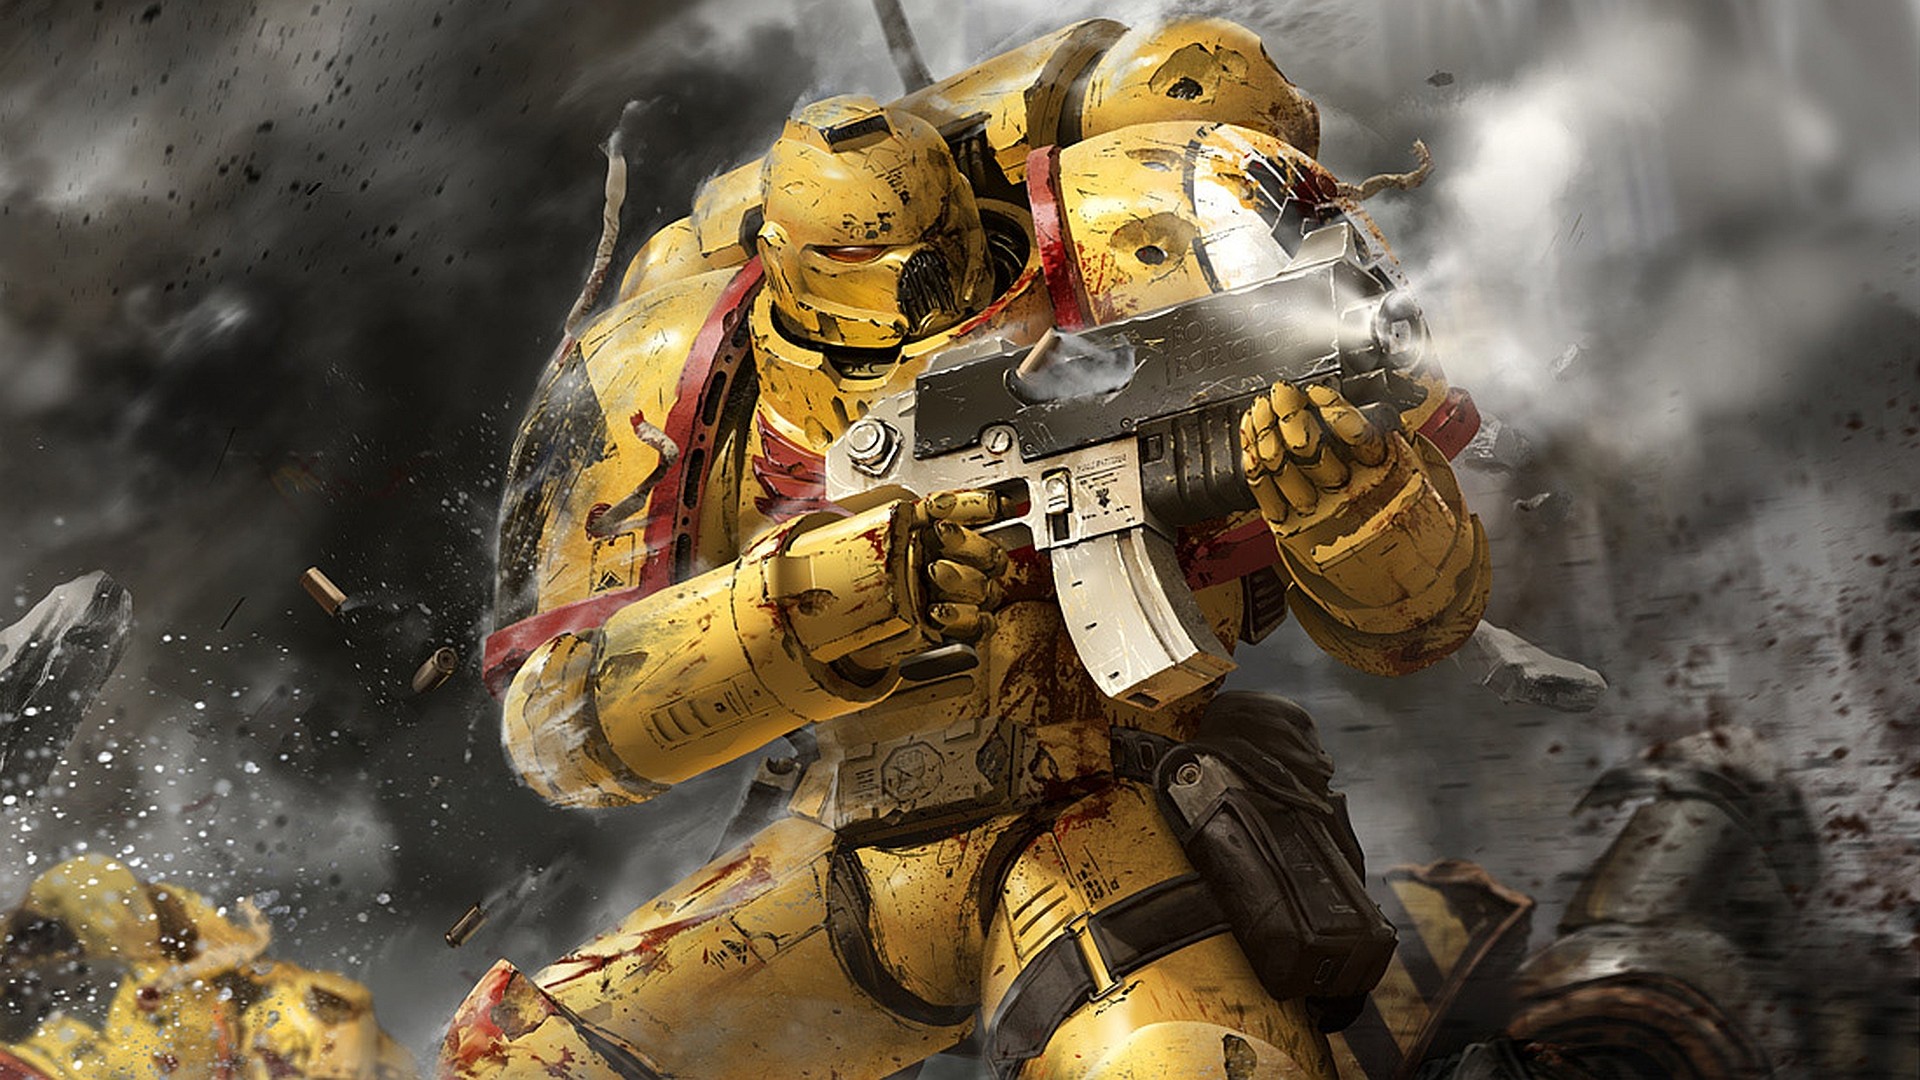 General 1920x1080 Warhammer 40,000 space marines battle science fiction armor weapon video games video game characters